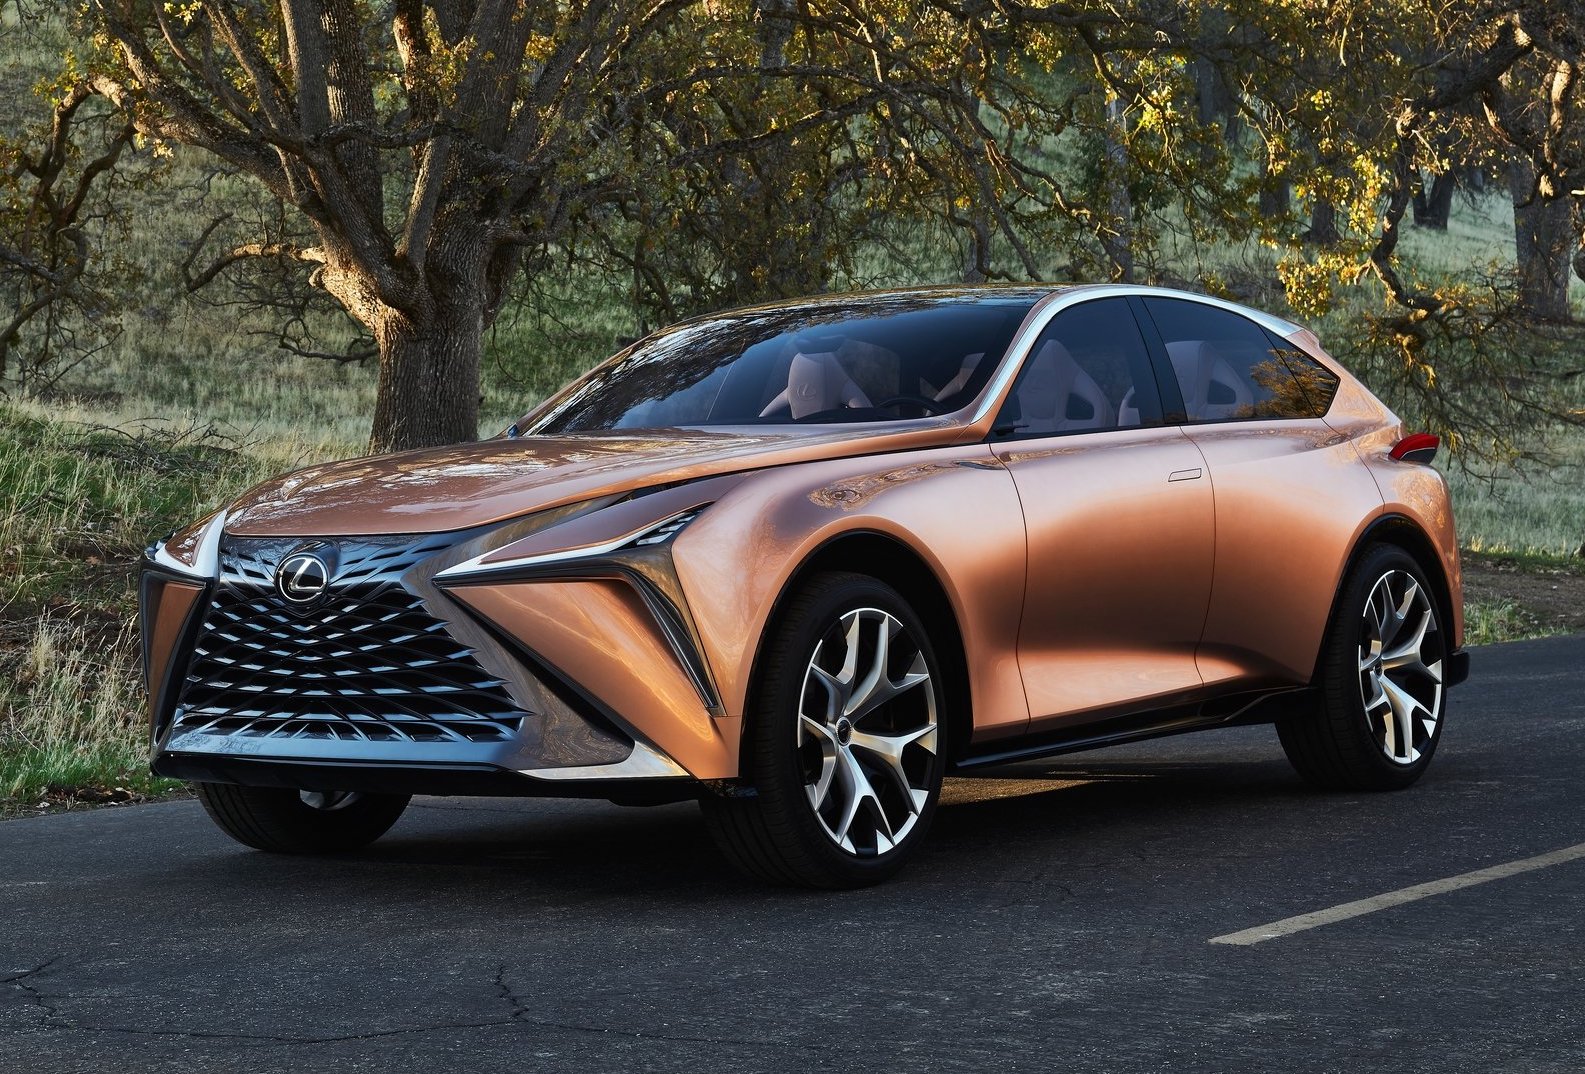 Lexus LF-1 Limitless concept hints at flagship crossover